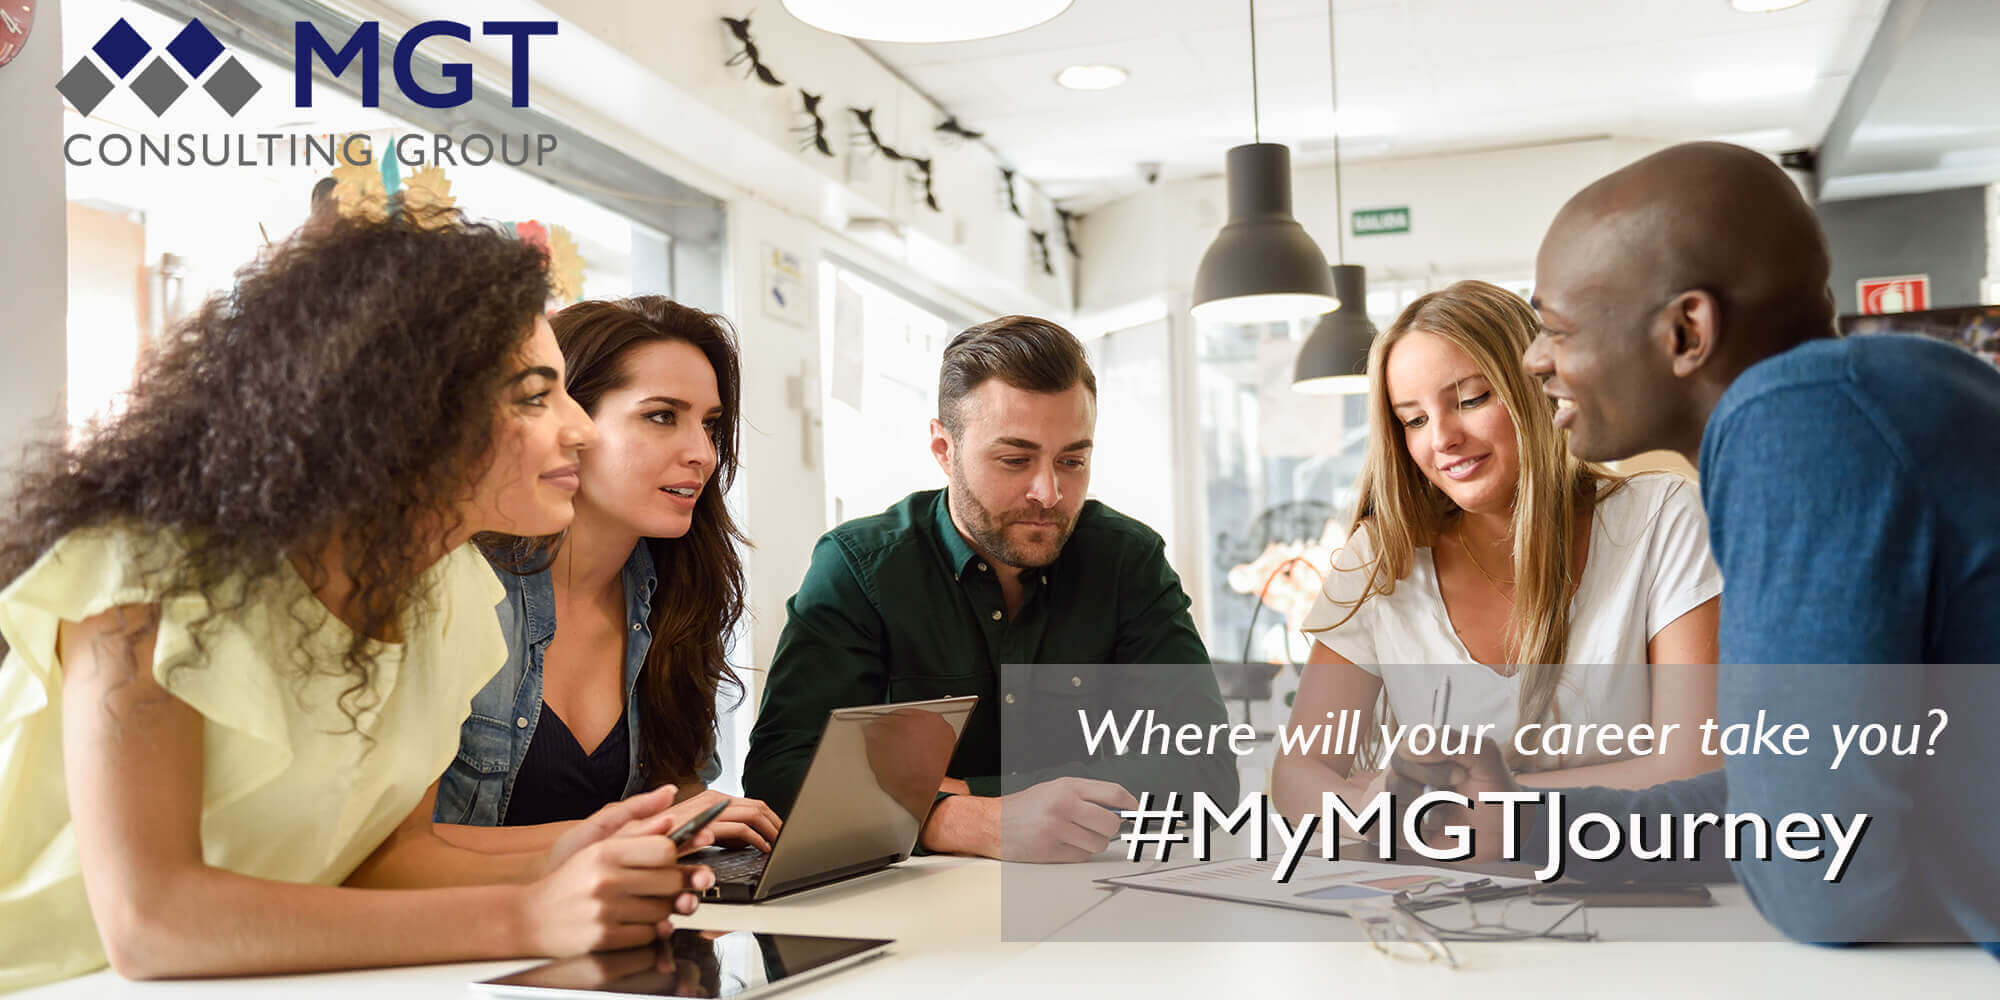 Justin Peterson's #MyMGTJourney is About Learning & Supporting Others